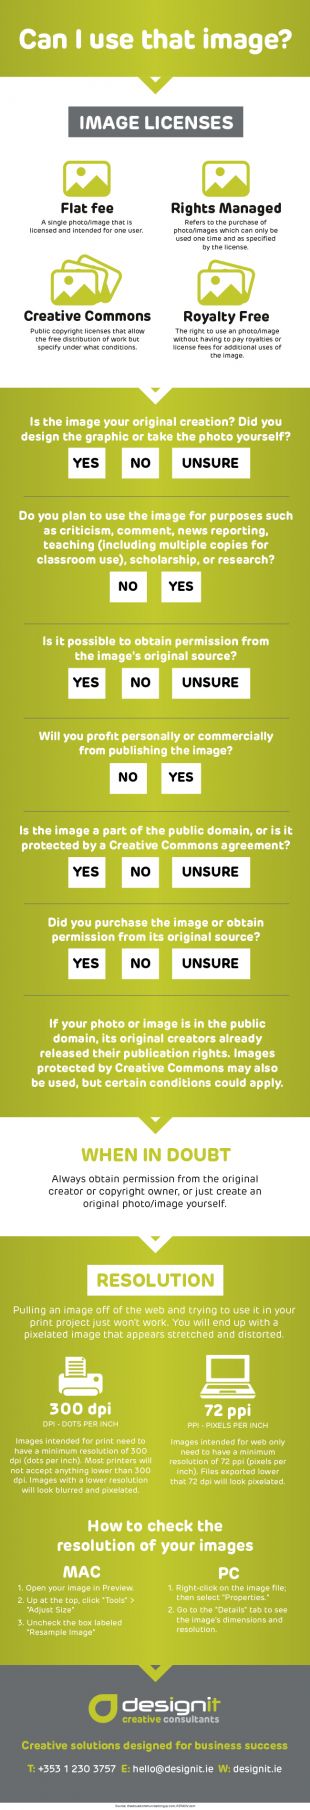 Infographic about image copyright and resolution